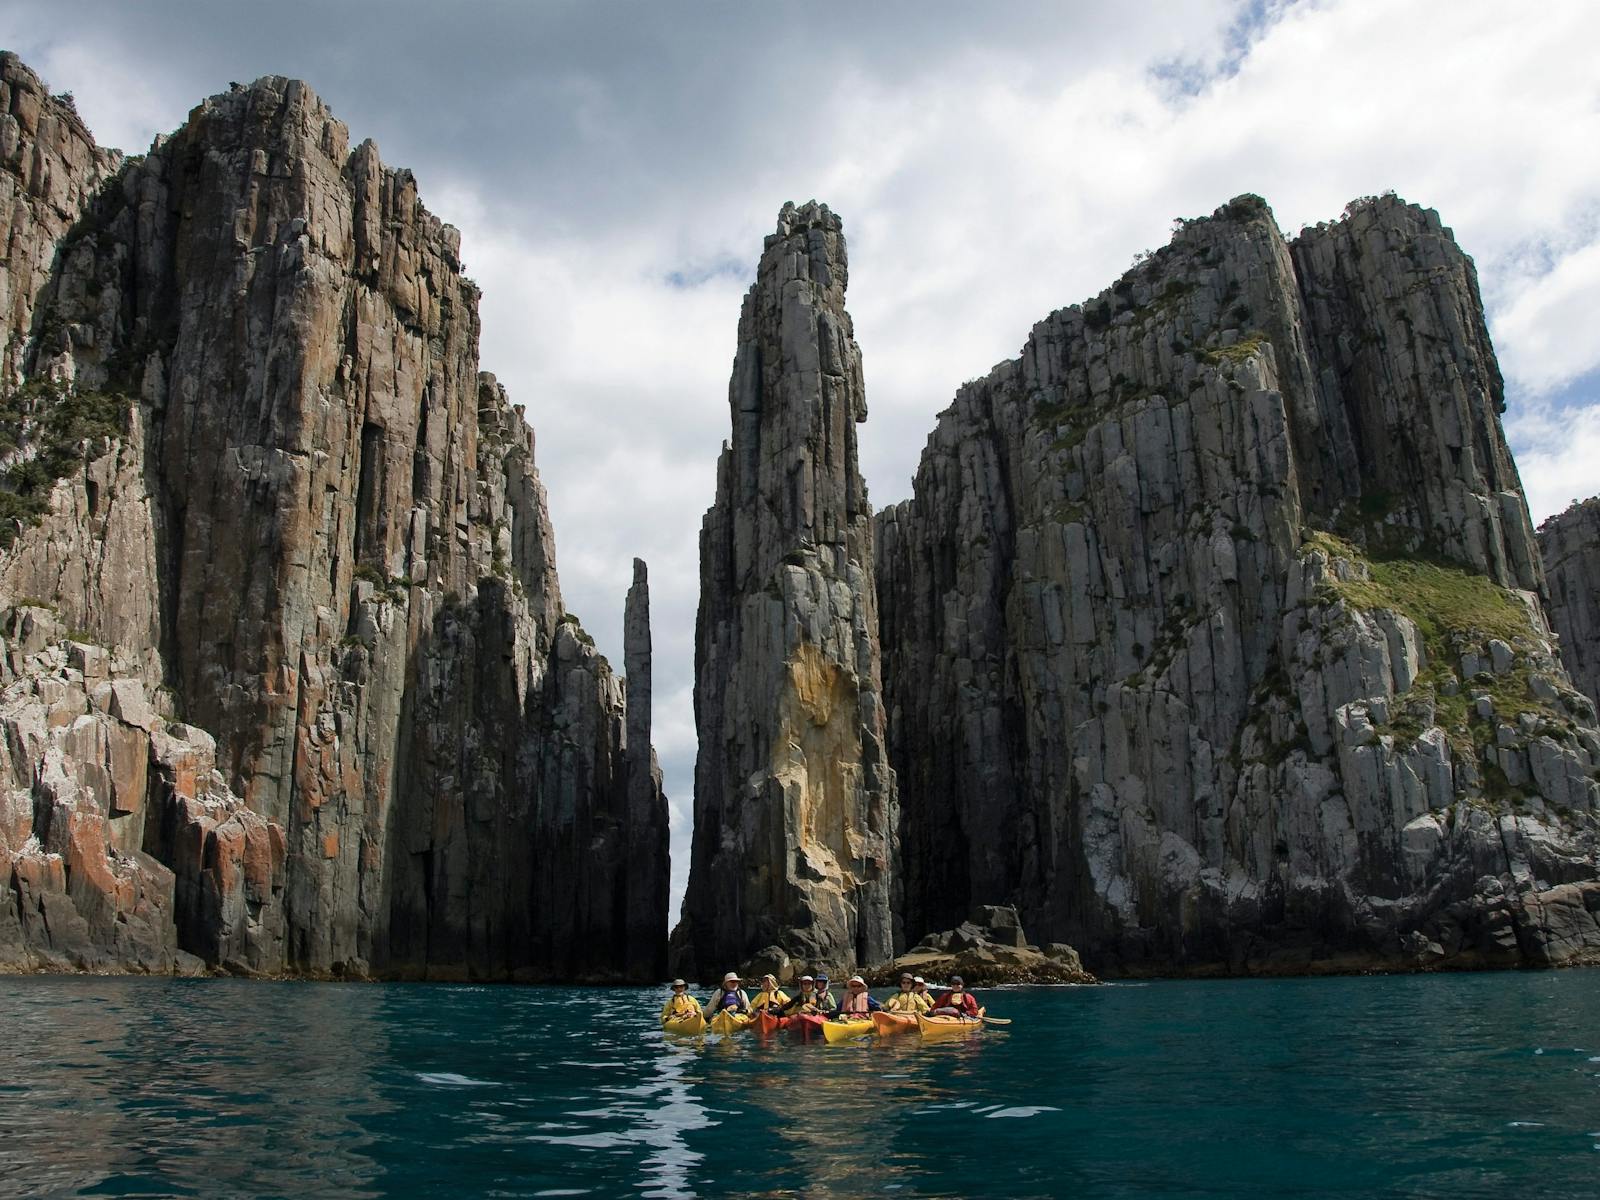 Kayakers at Cape Hauy near Fortescue Bay on the Tasman Peninsula